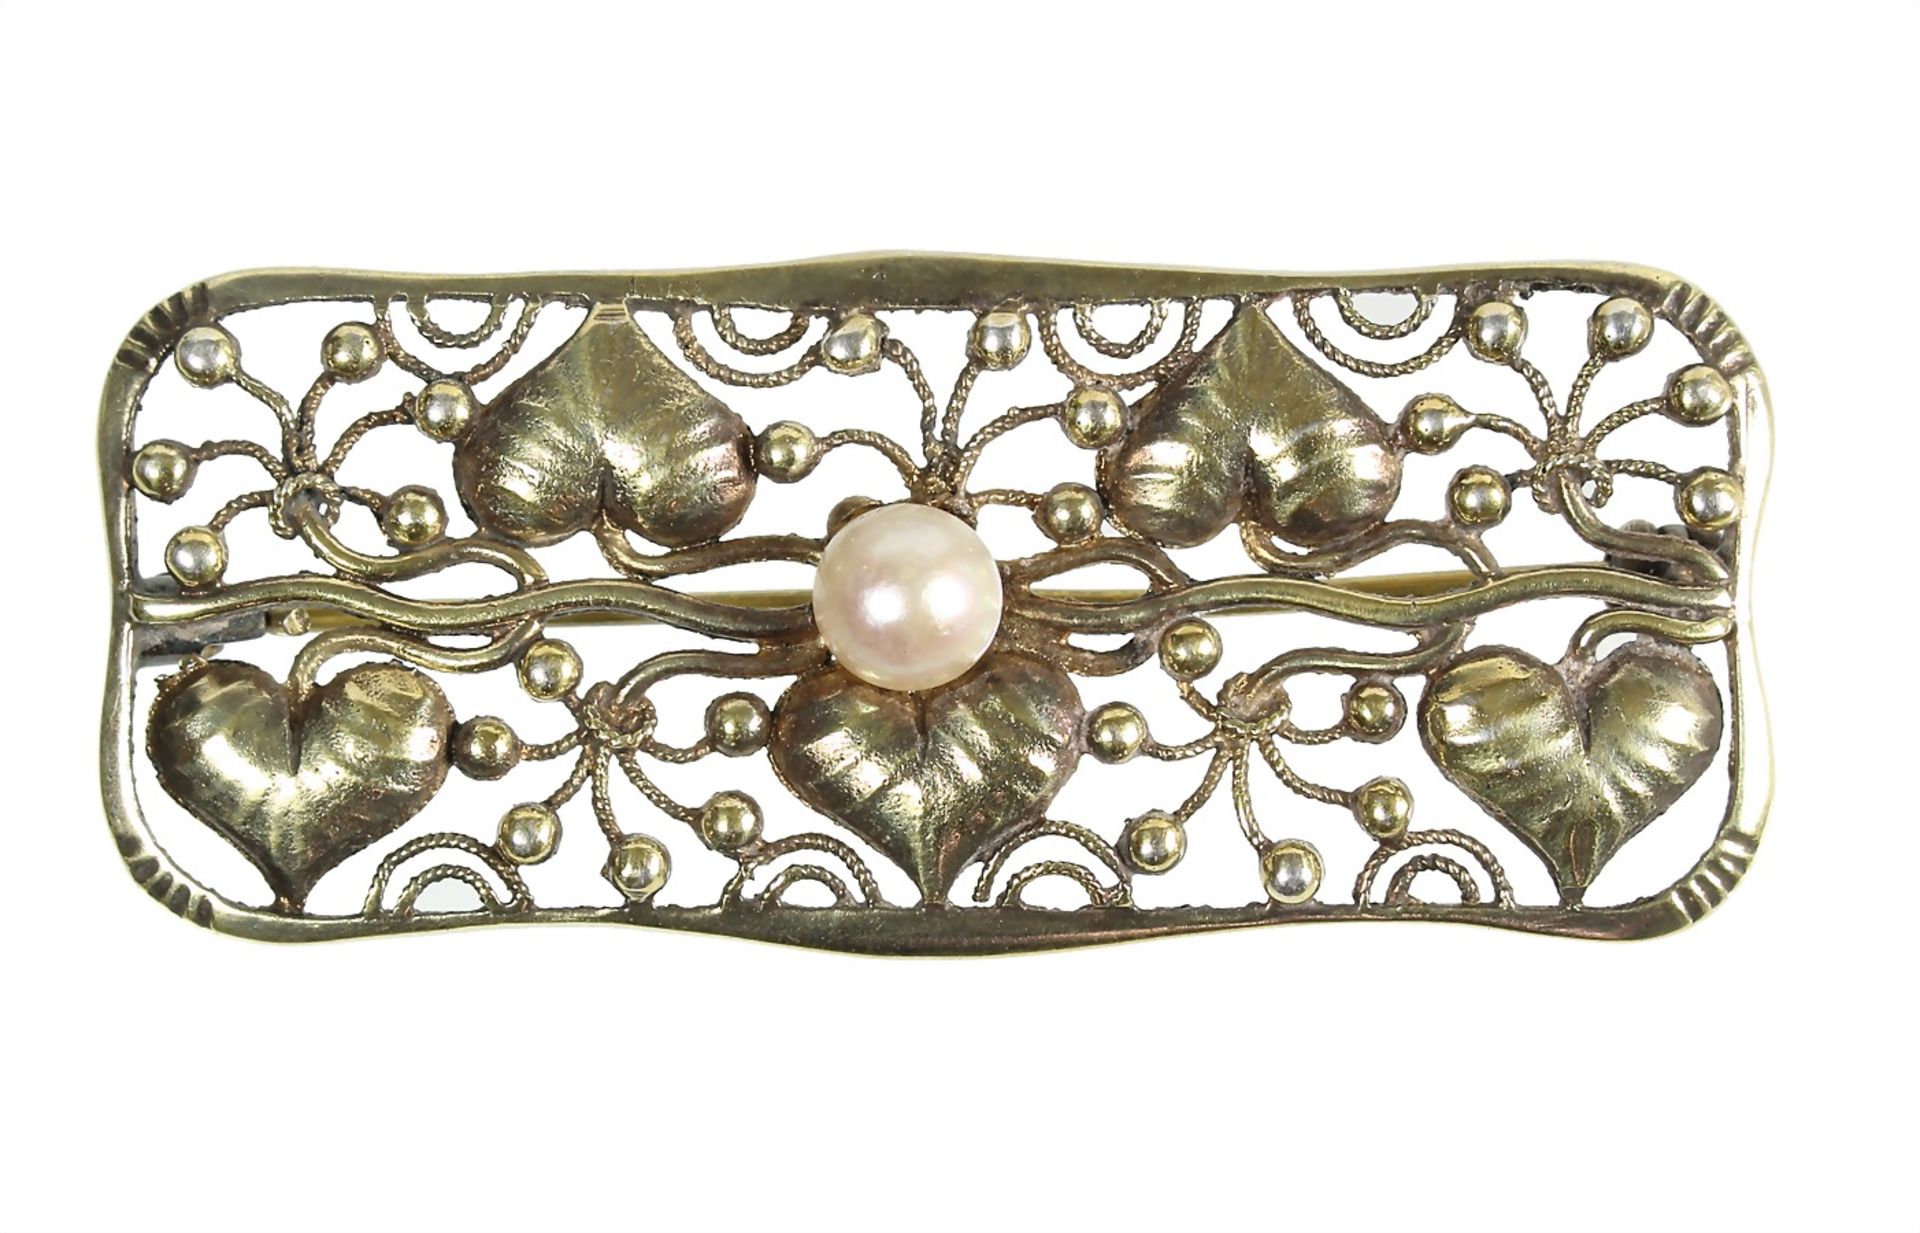 brooch, art nouveau around 1910, silver 835/000 gilded, signed Ln (LAURIN), small Akoya pearl,